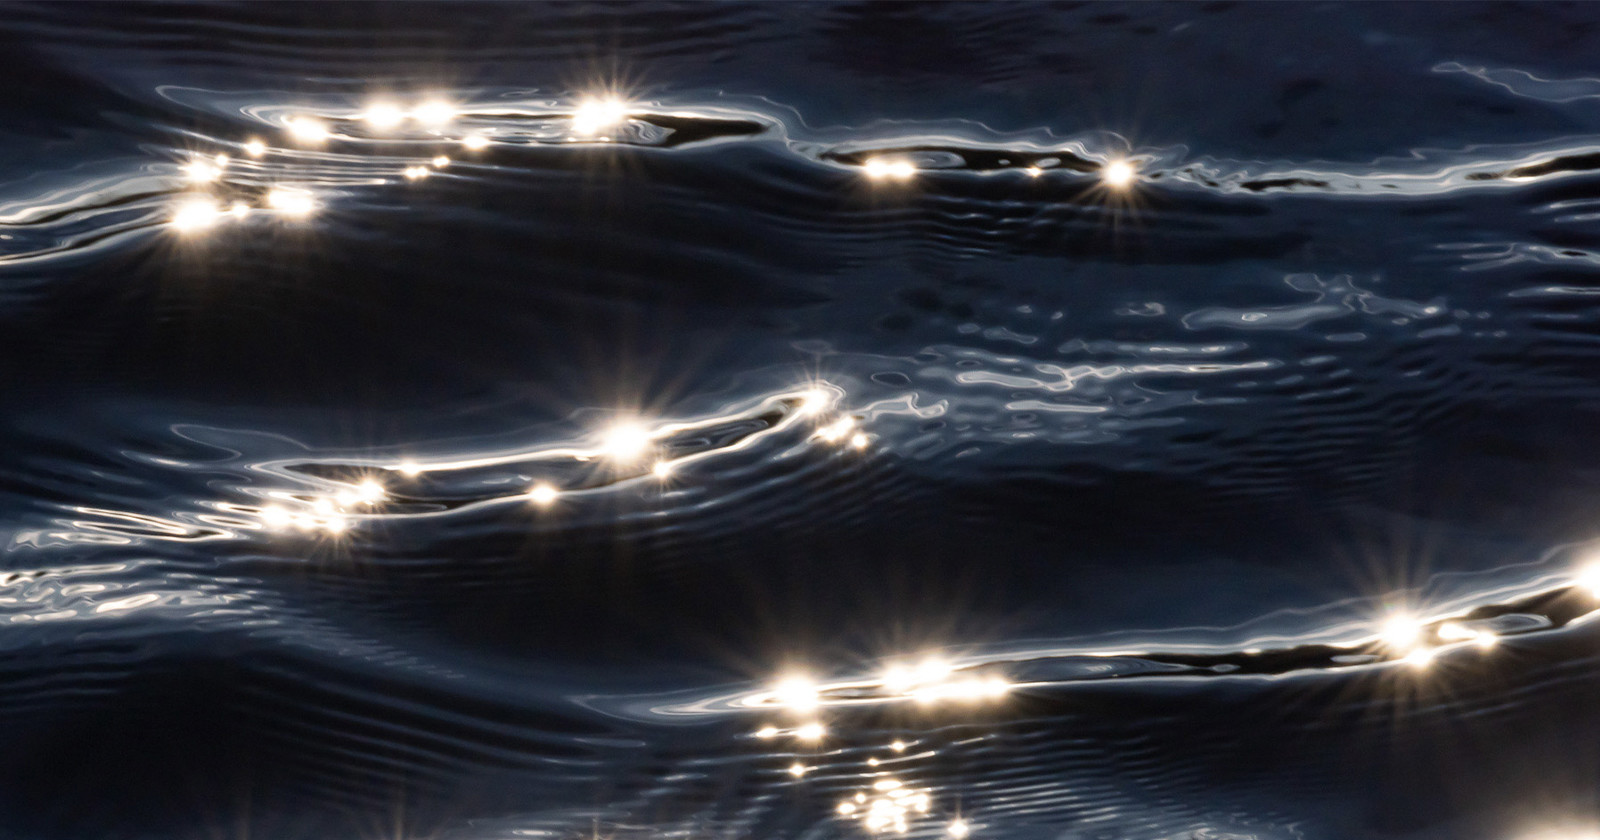 ‘Ebb and Flow’ is a Calming Abstract Photo Series Featuring Water